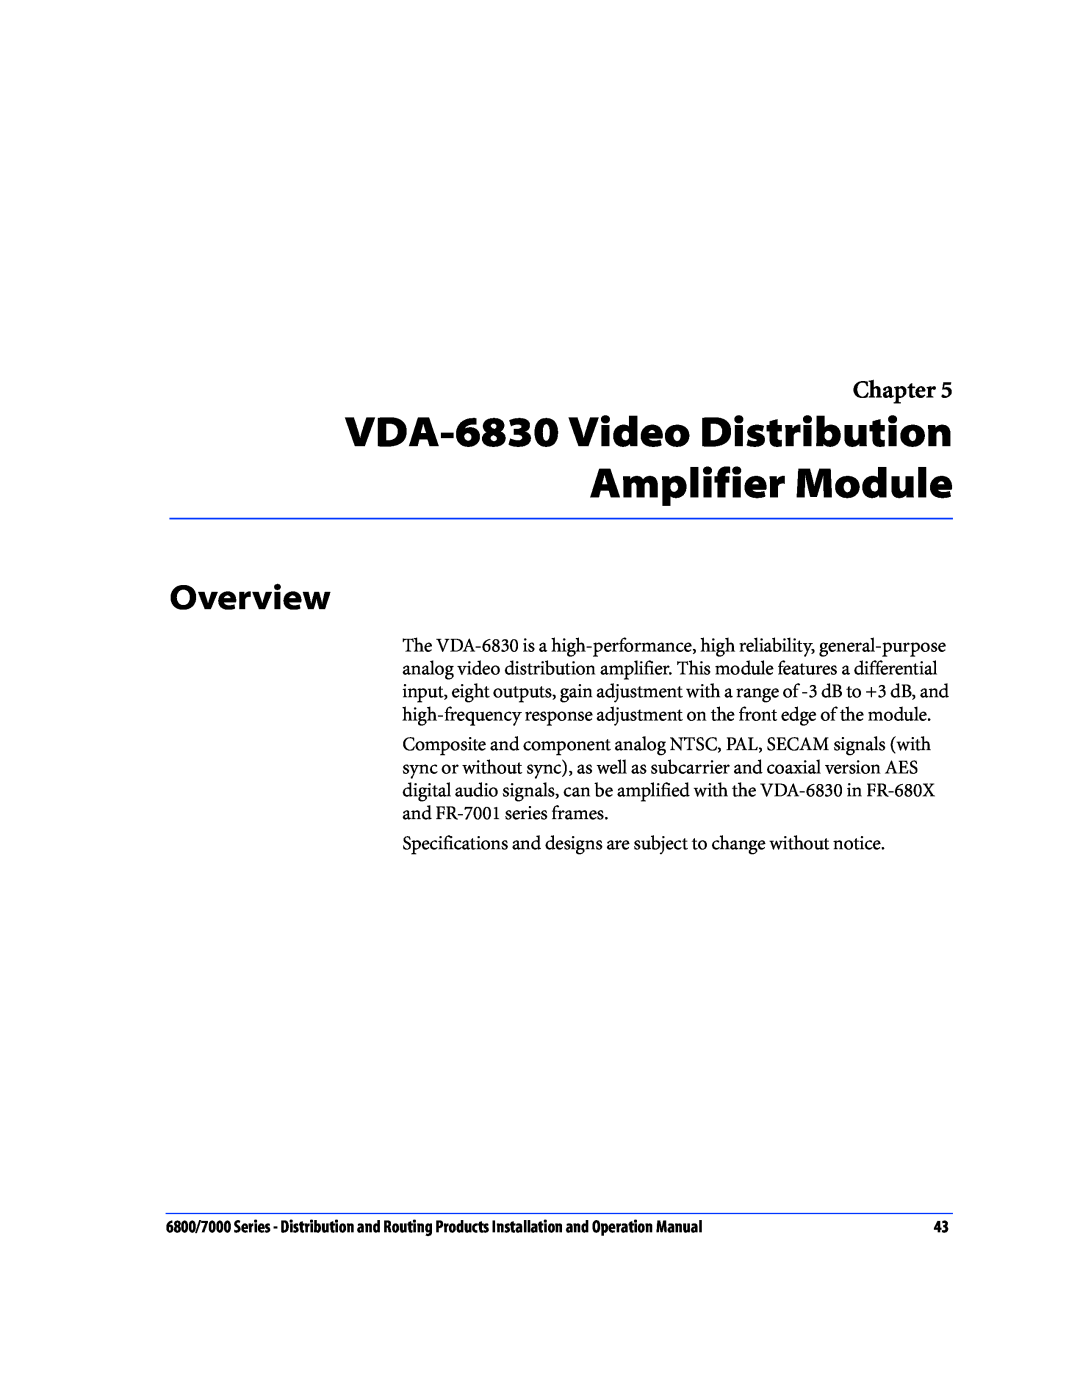 Nokia 6800 Series, 7000 Series operation manual VDA-6830 Video Distribution Amplifier Module, Overview, Chapter 